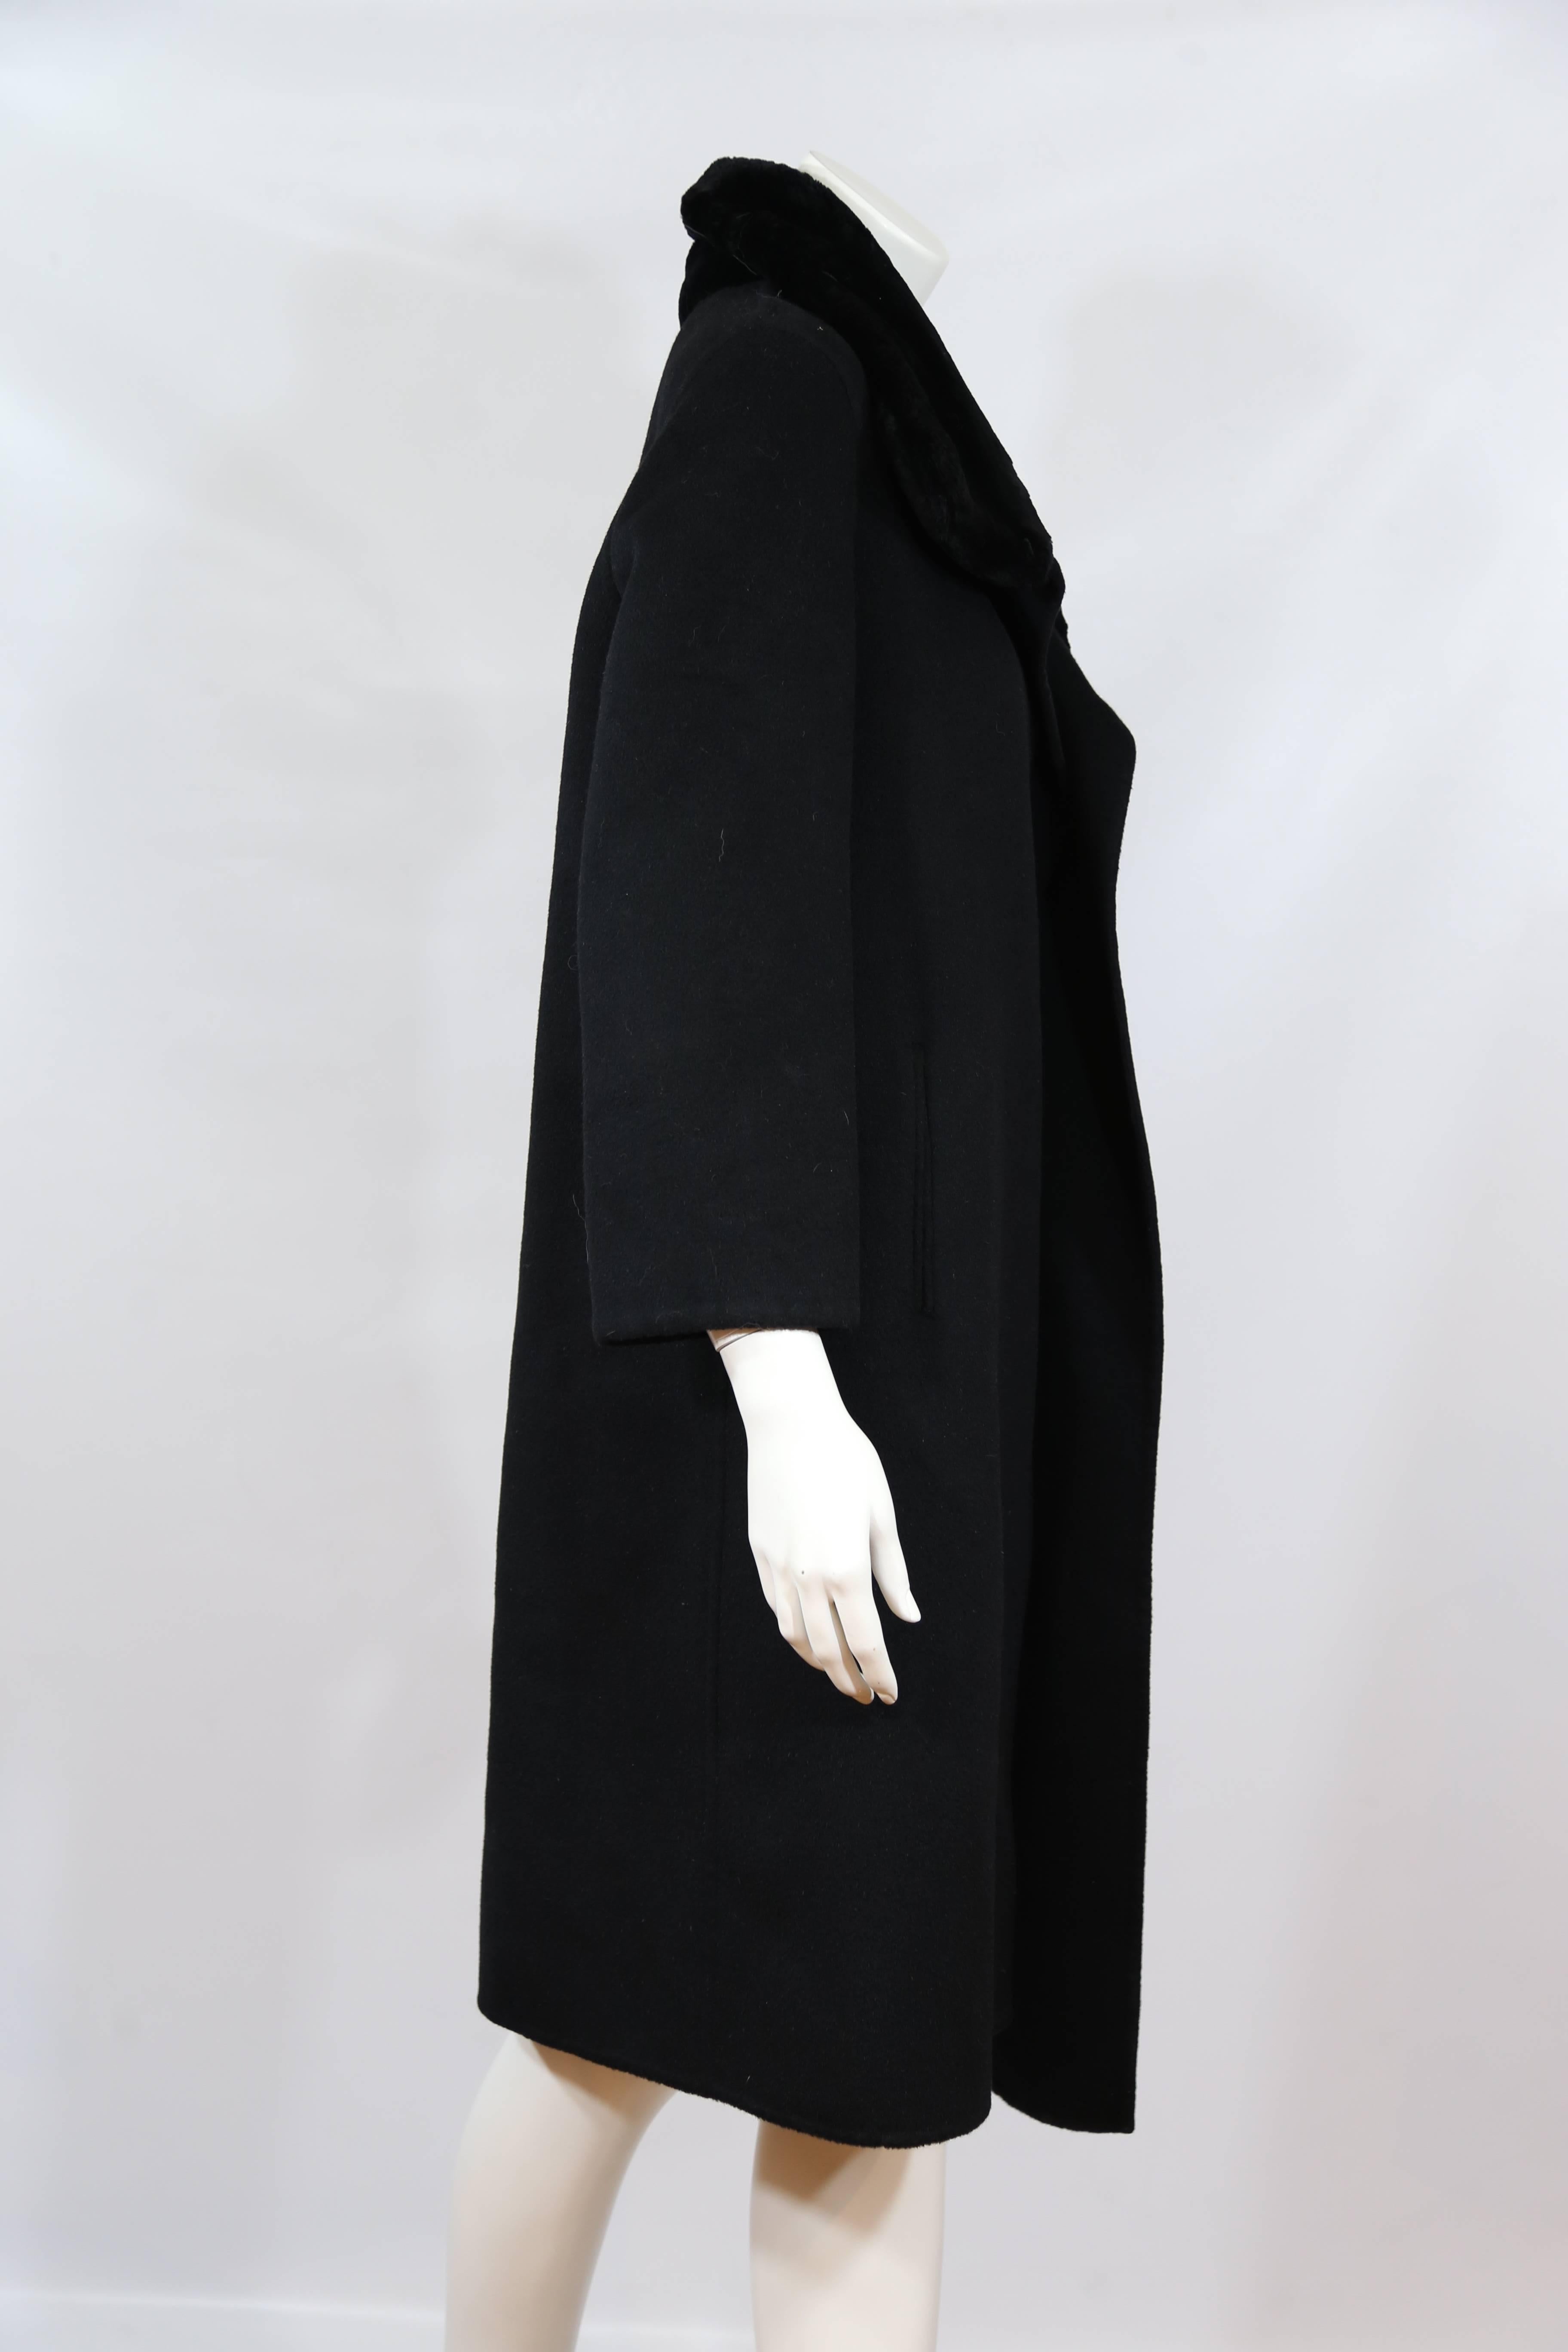 Michael Kors black wool coat with collar and hidden button closure.